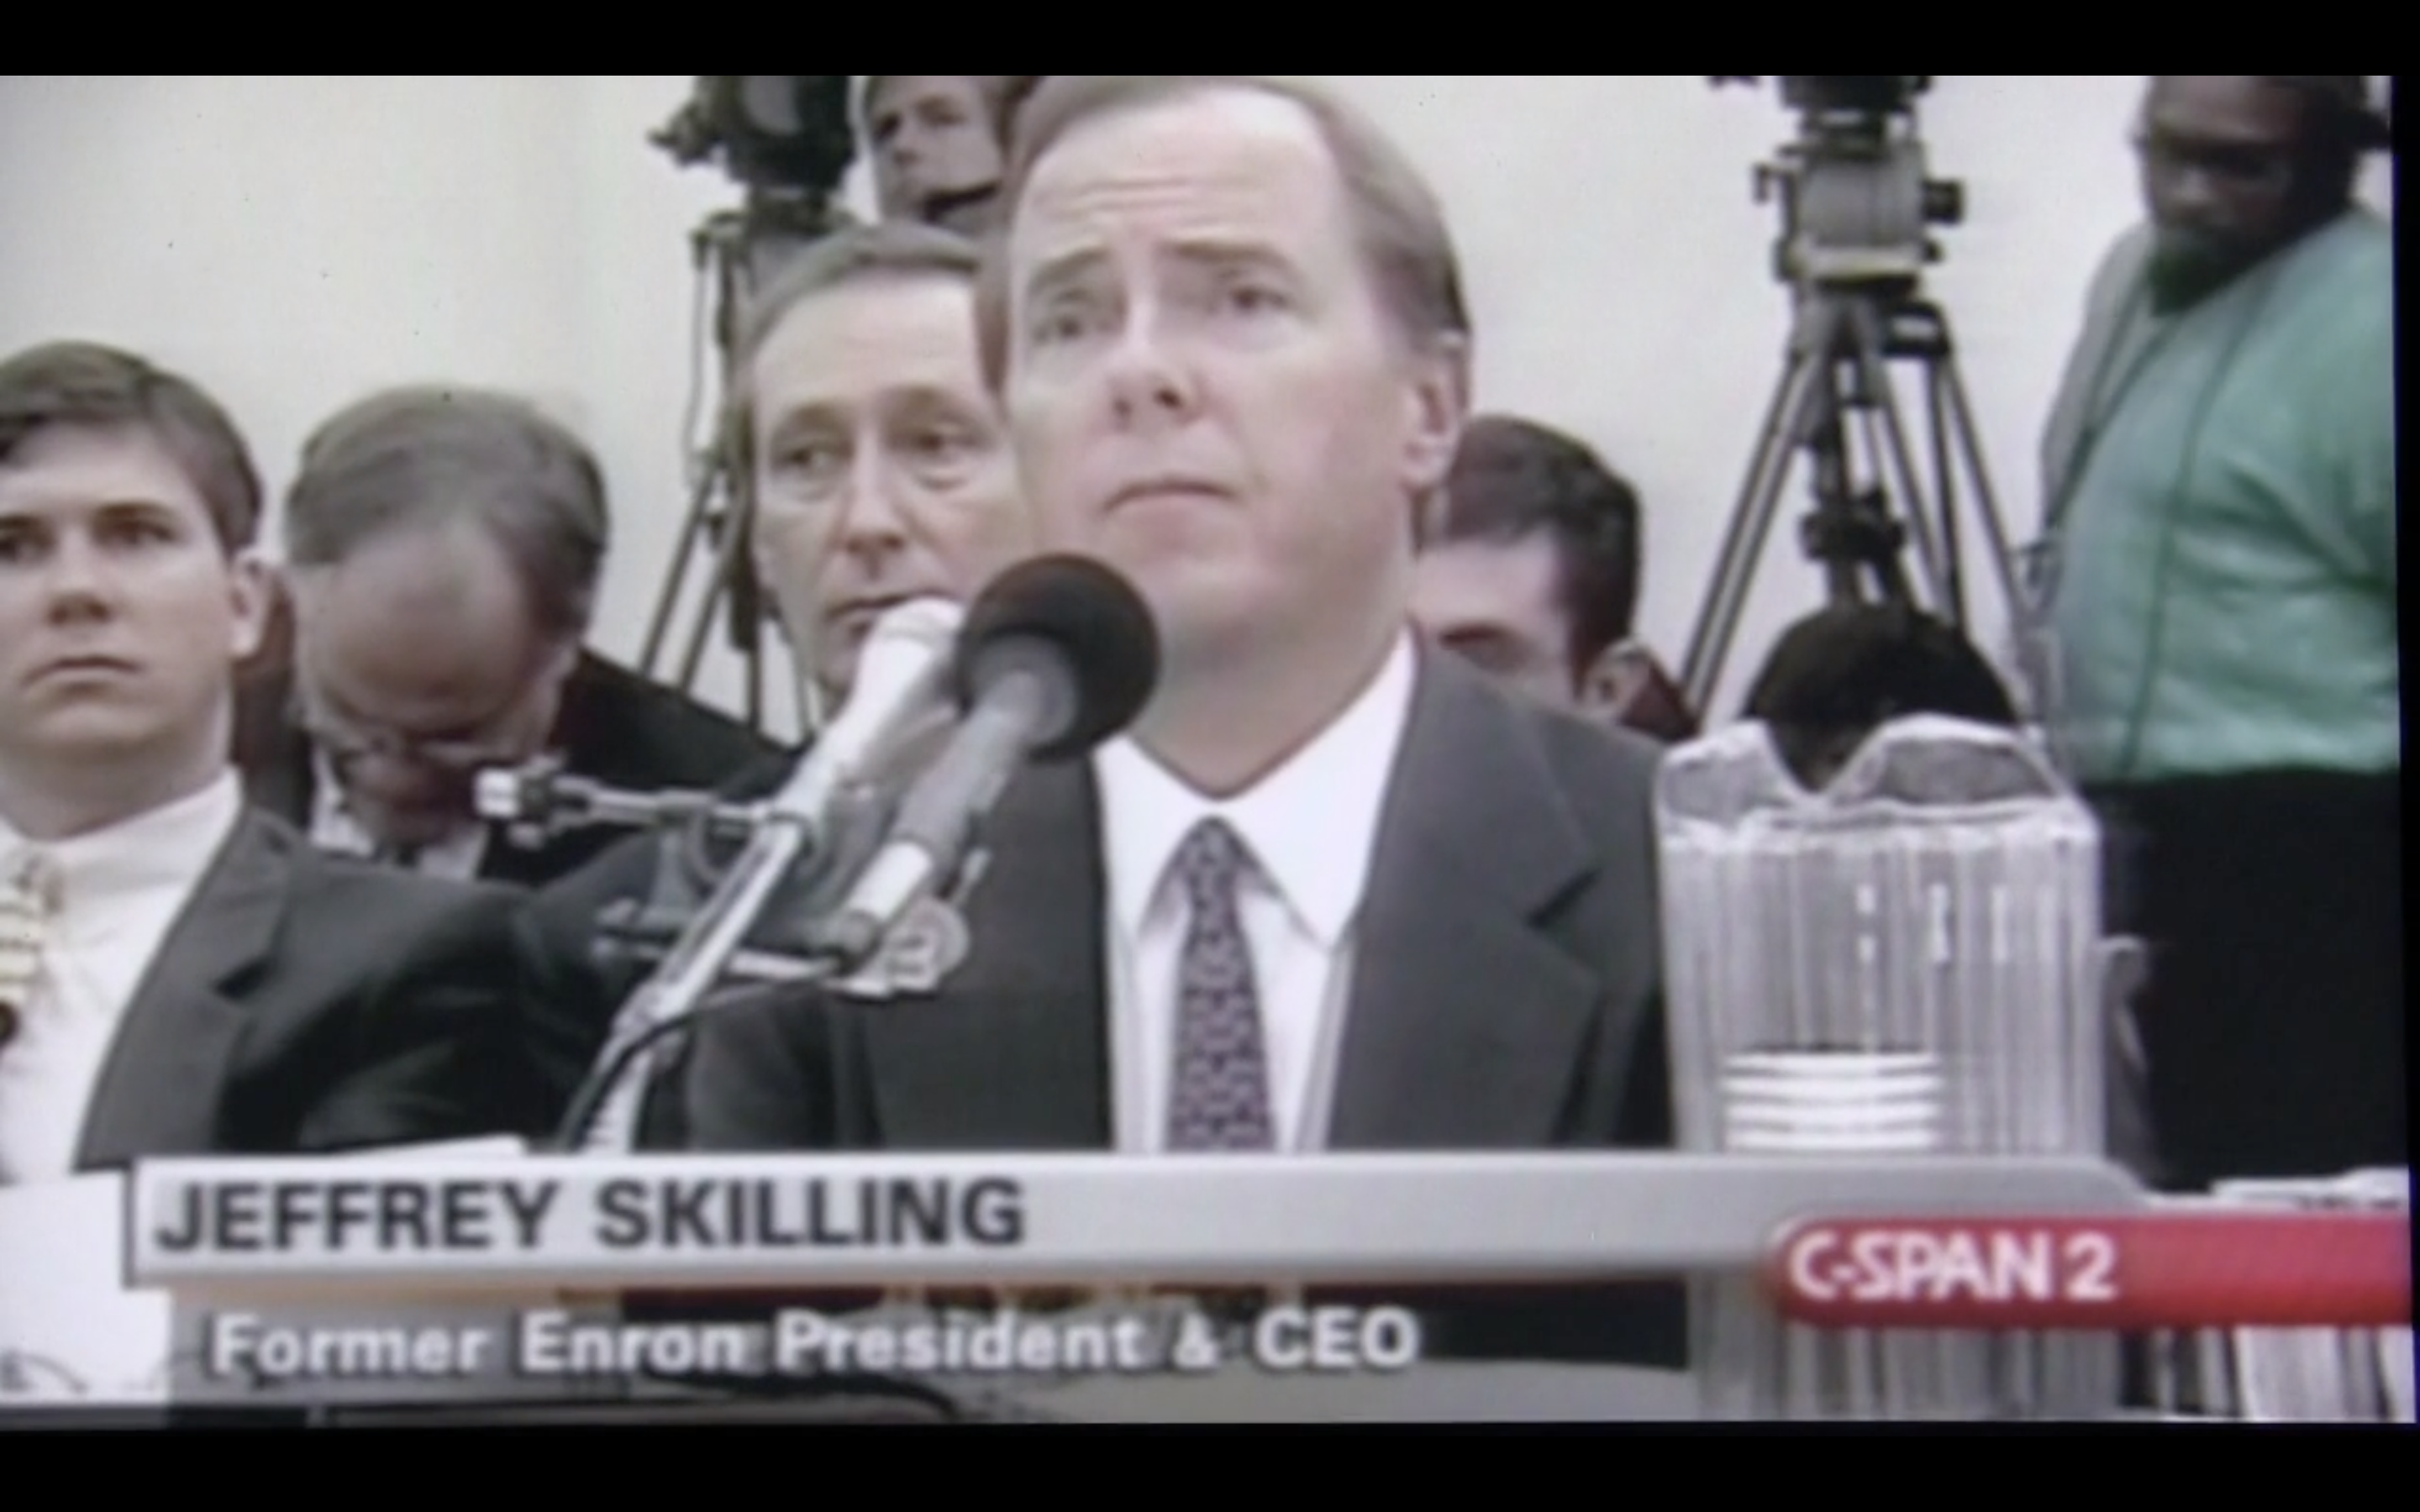 Shot from the movie Enron: The Smartest Guys in the Room, made in 2005